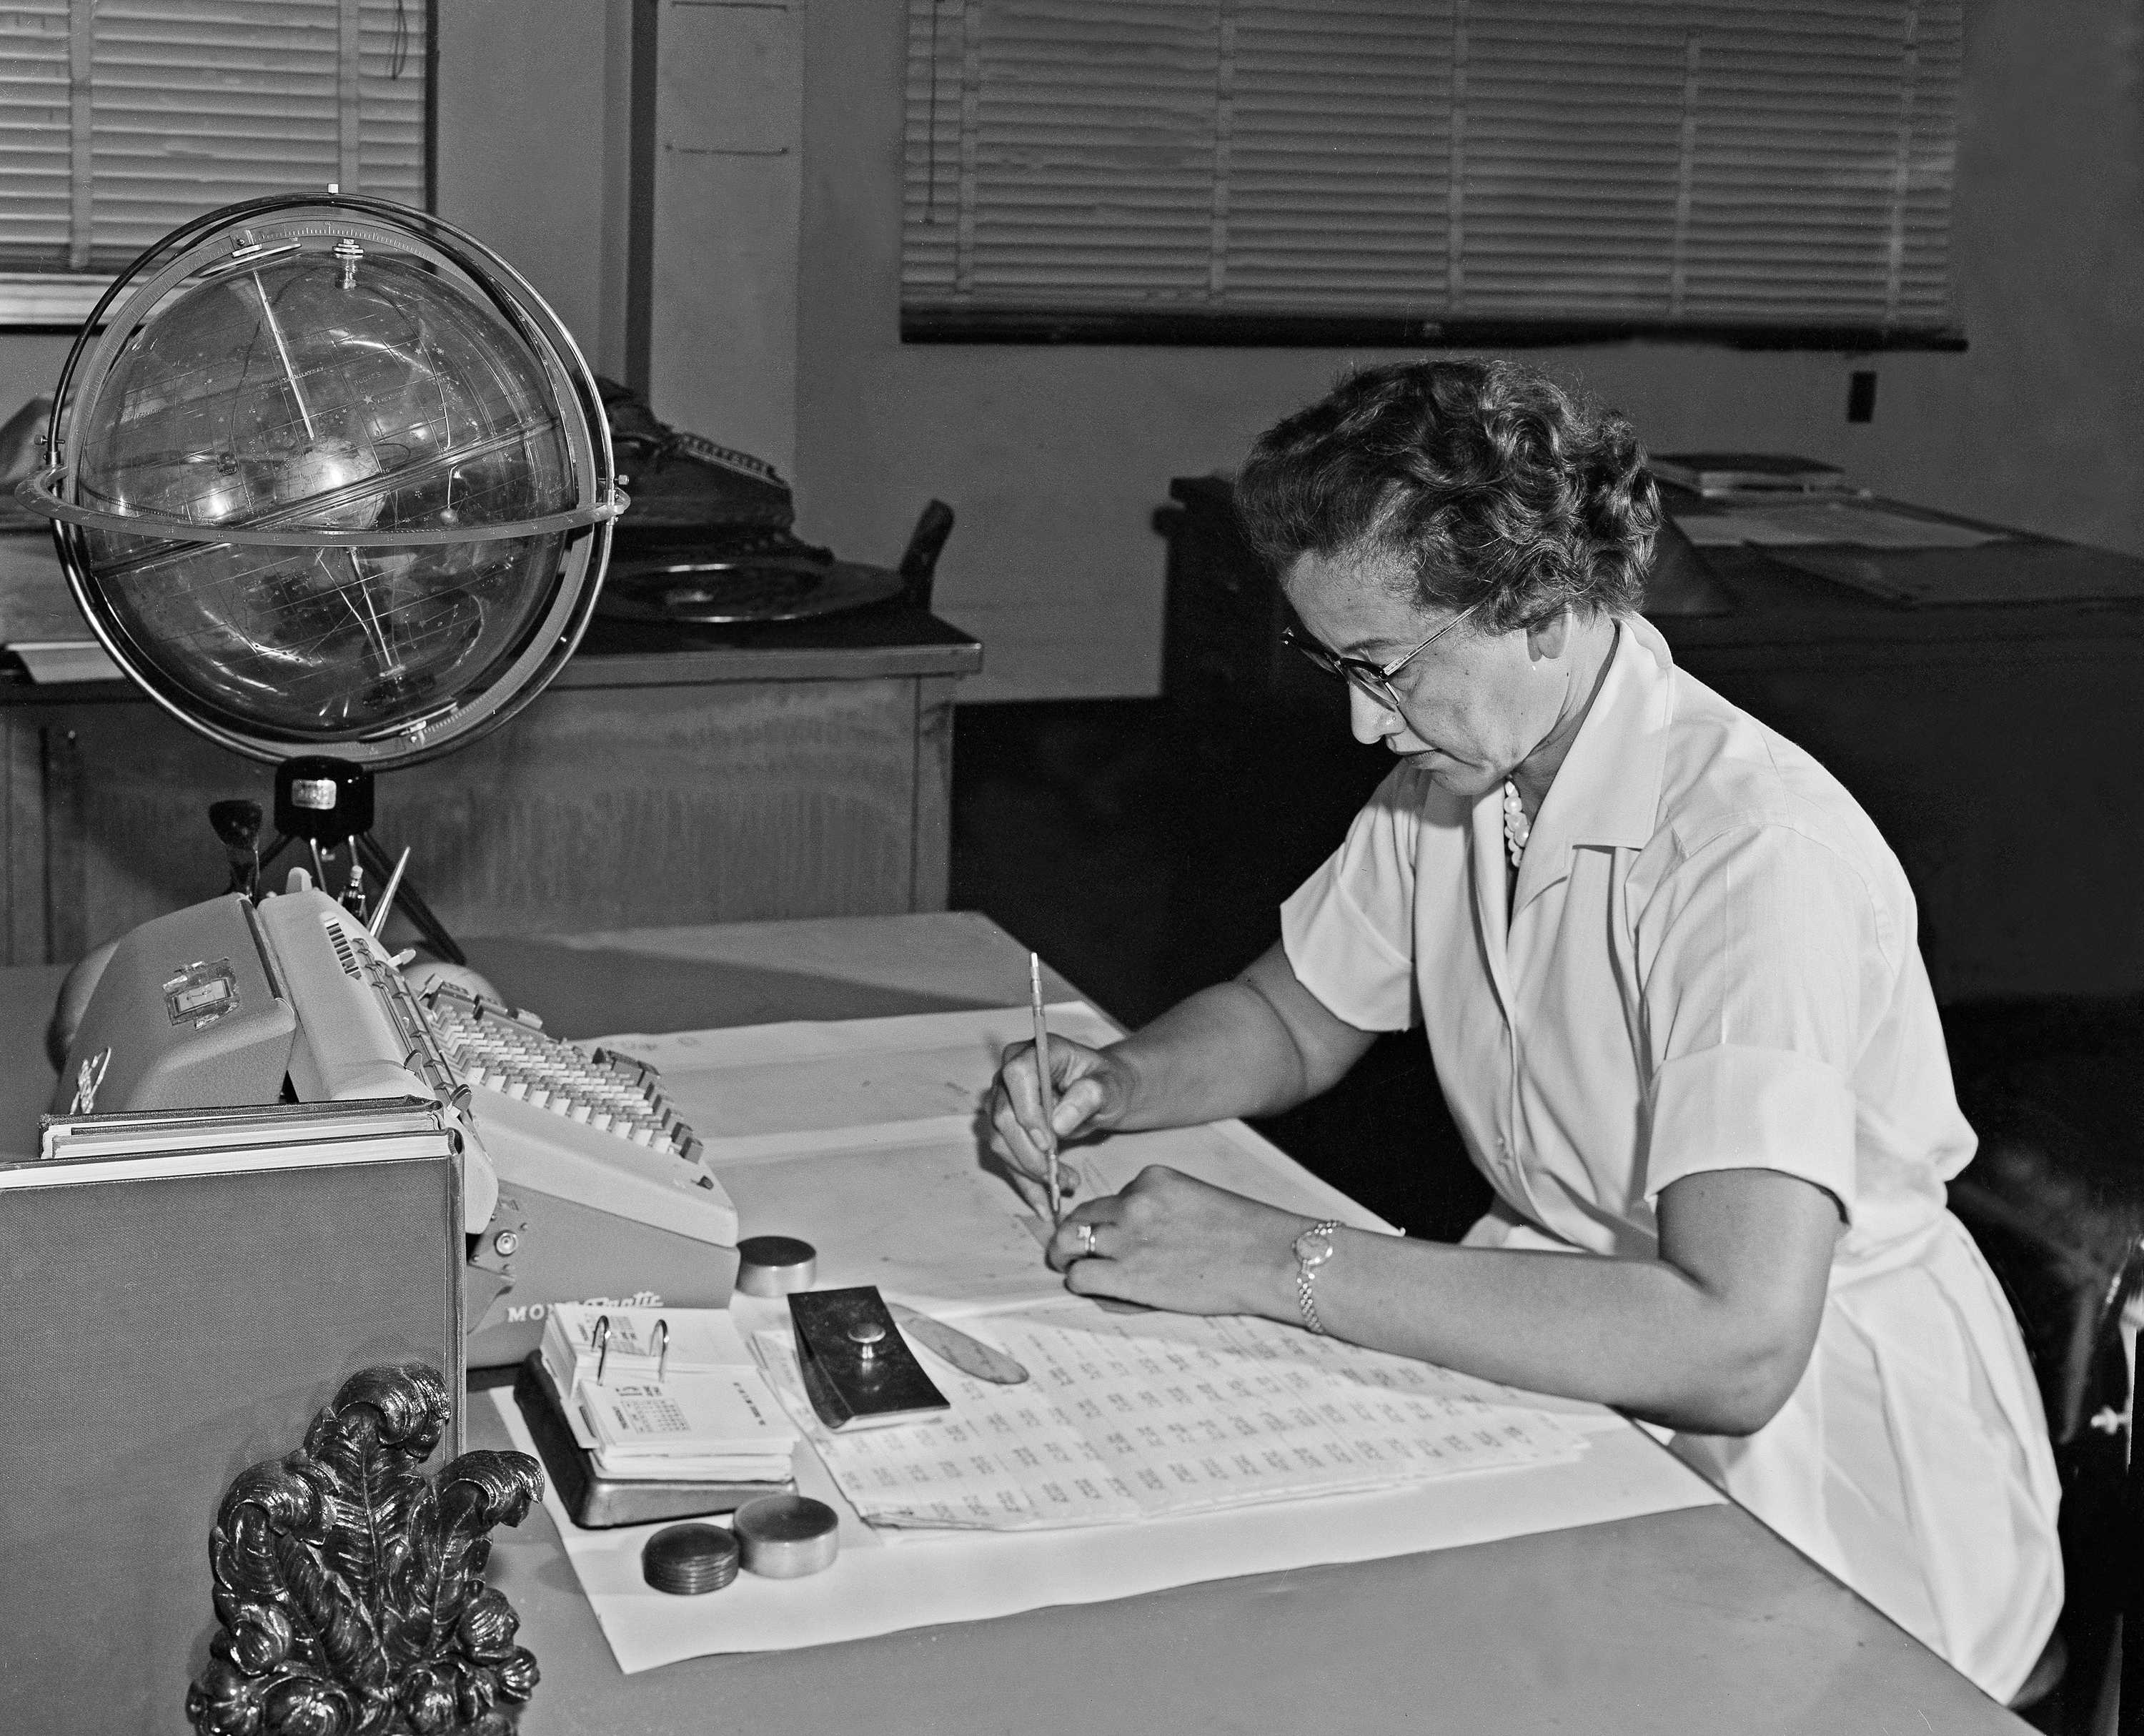 Katherine Johnson is focused on the papers in front of her as she works at a desk. She has a pencil in her hand.